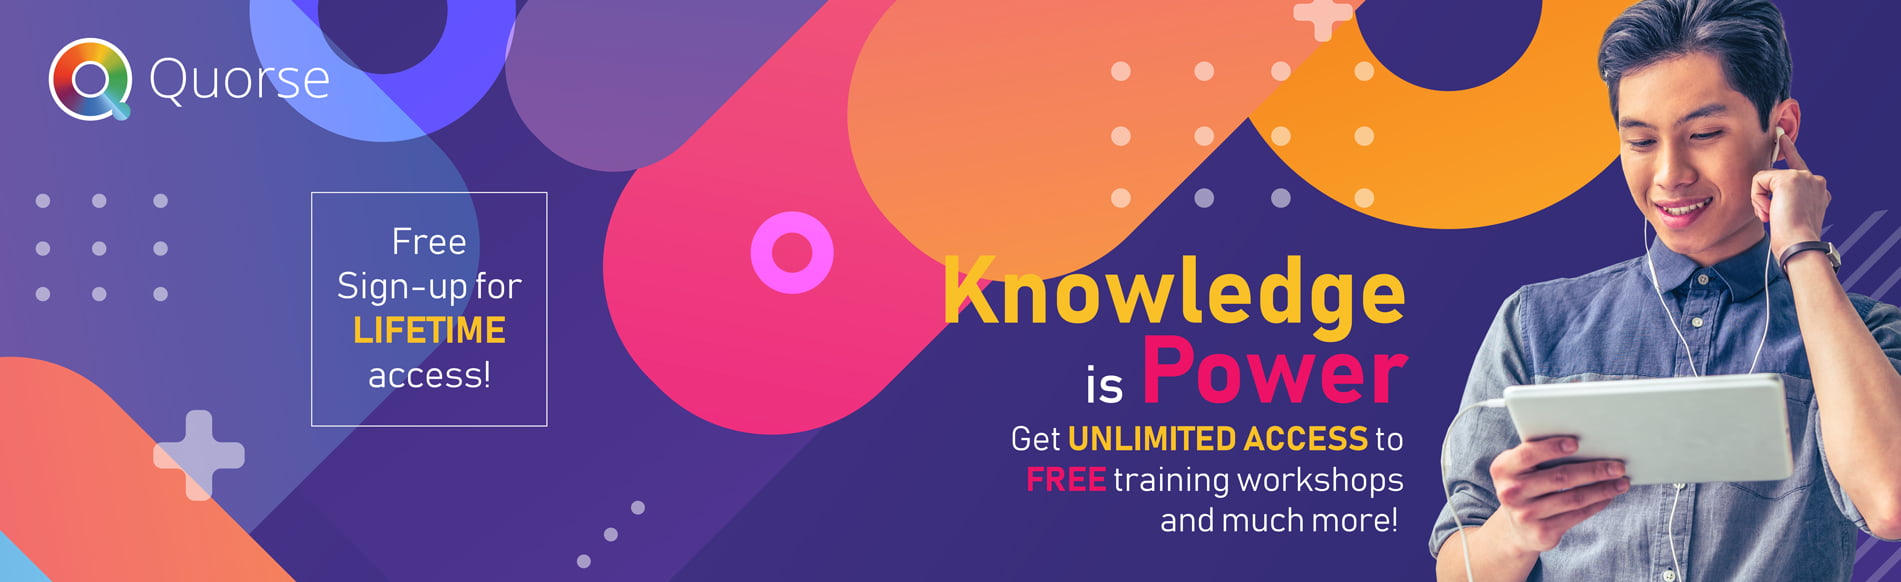 Knowledge is power Web Page Banner 03 03